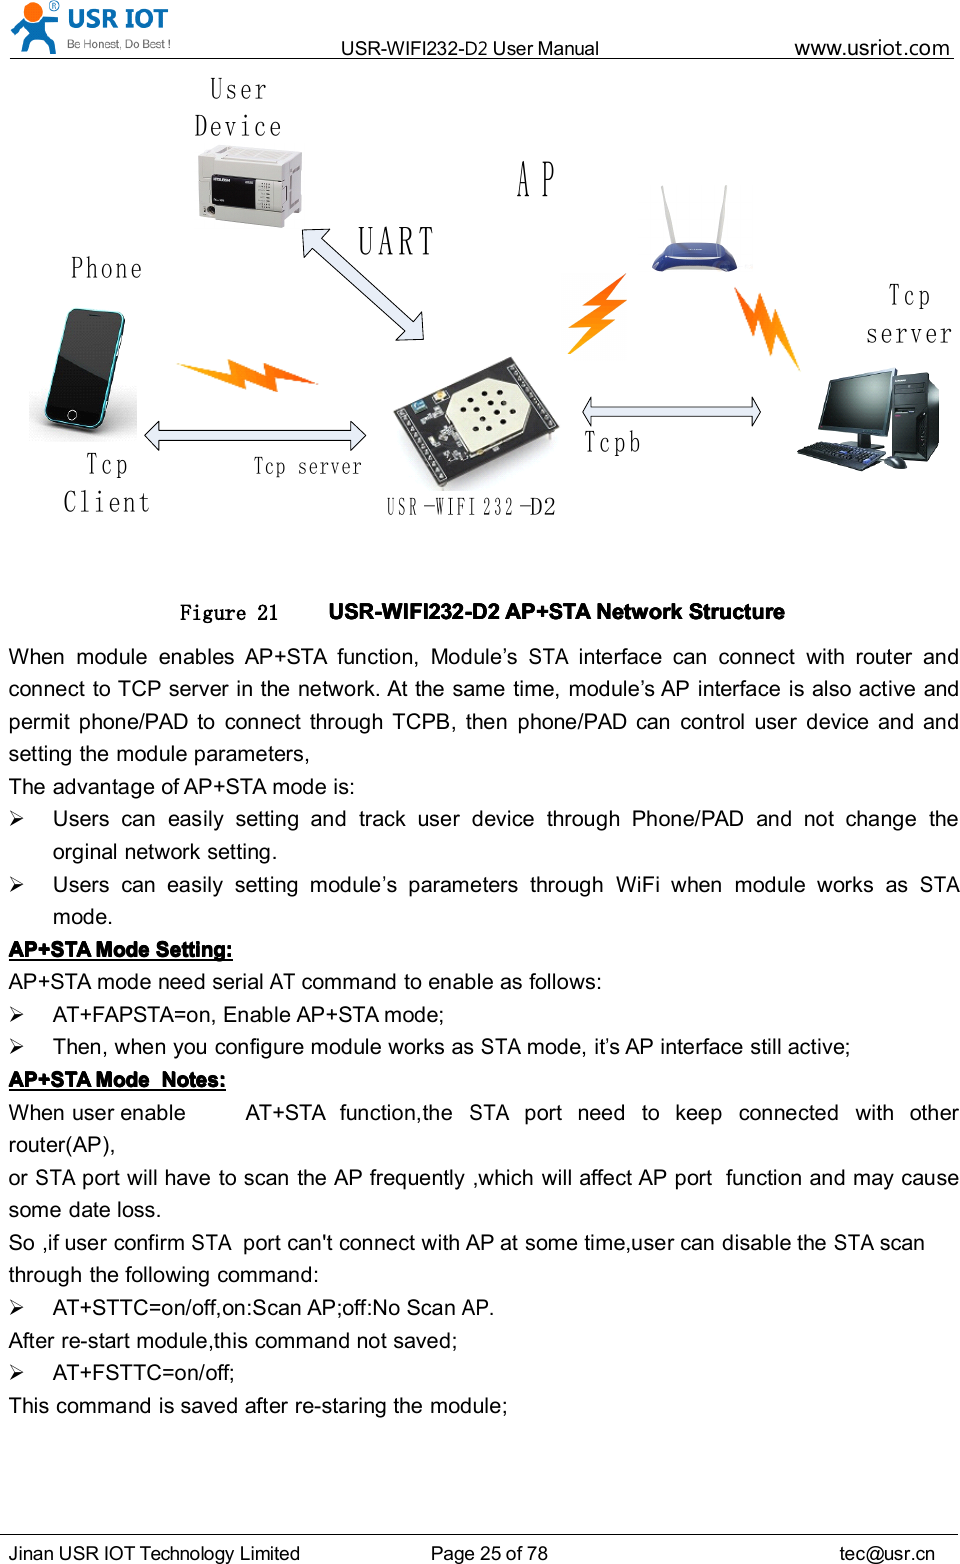 USR-WIFI232- D2 User Manual www.usr iot .comJinan USR IOT Technology Limited Page 25 of 78 tec@usr.cnAPUser DeviceUARTPhoneUSR-WIFI232- D 2Tcp ClientTcp serverTcp serverTcpbFigure 21 USR-WIFI232-D2USR-WIFI232-D2USR-WIFI232-D2USR-WIFI232-D2 AP+STAAP+STAAP+STAAP+STA NetworkNetworkNetworkNetwork StructureStructureStructureStructureWhen module enables AP+STA function, Module ’ sSTAinterface can connect with router andconnect to TCP server in the network. At the same time, module ’ s AP interface is also active andpermit phone/PAD to connect through TCPB, then phone/PAD can control user device and andsetting the module parameters,The advantage of AP+STA mode is:Users can easily setting and track user device through Phone/PAD and not change theorginal network setting.Users can easily setting module’s parameters through WiFi when module works asSTAmode.AP+STAAP+STAAP+STAAP+STA ModeModeModeMode Setting:Setting:Setting:Setting:AP+STA mode need serialATcommand to enable as follows:AT+FAPSTA=on, Enable AP+STA mode;Then, when you configure module works asSTAmode, it’s AP interface still active;AP+STAAP+STAAP+STAAP+STA ModeModeModeMode Notes:Notes:Notes:Notes:When user enable AT+STA function,theSTAport need to keep connected with otherrouter(AP),orSTAport will have to scan the AP frequently ,which will affect AP port function and may causesome date loss.So ,if user confirmSTAport can&apos;t connect with AP at some time,user can disable theSTAscanthrough the following command:AT+STTC=on/off,on:Scan AP;off:N o ScanAP.After re-start module,this command not saved;AT+FSTTC=on/off;This command is saved after re-staring the module;